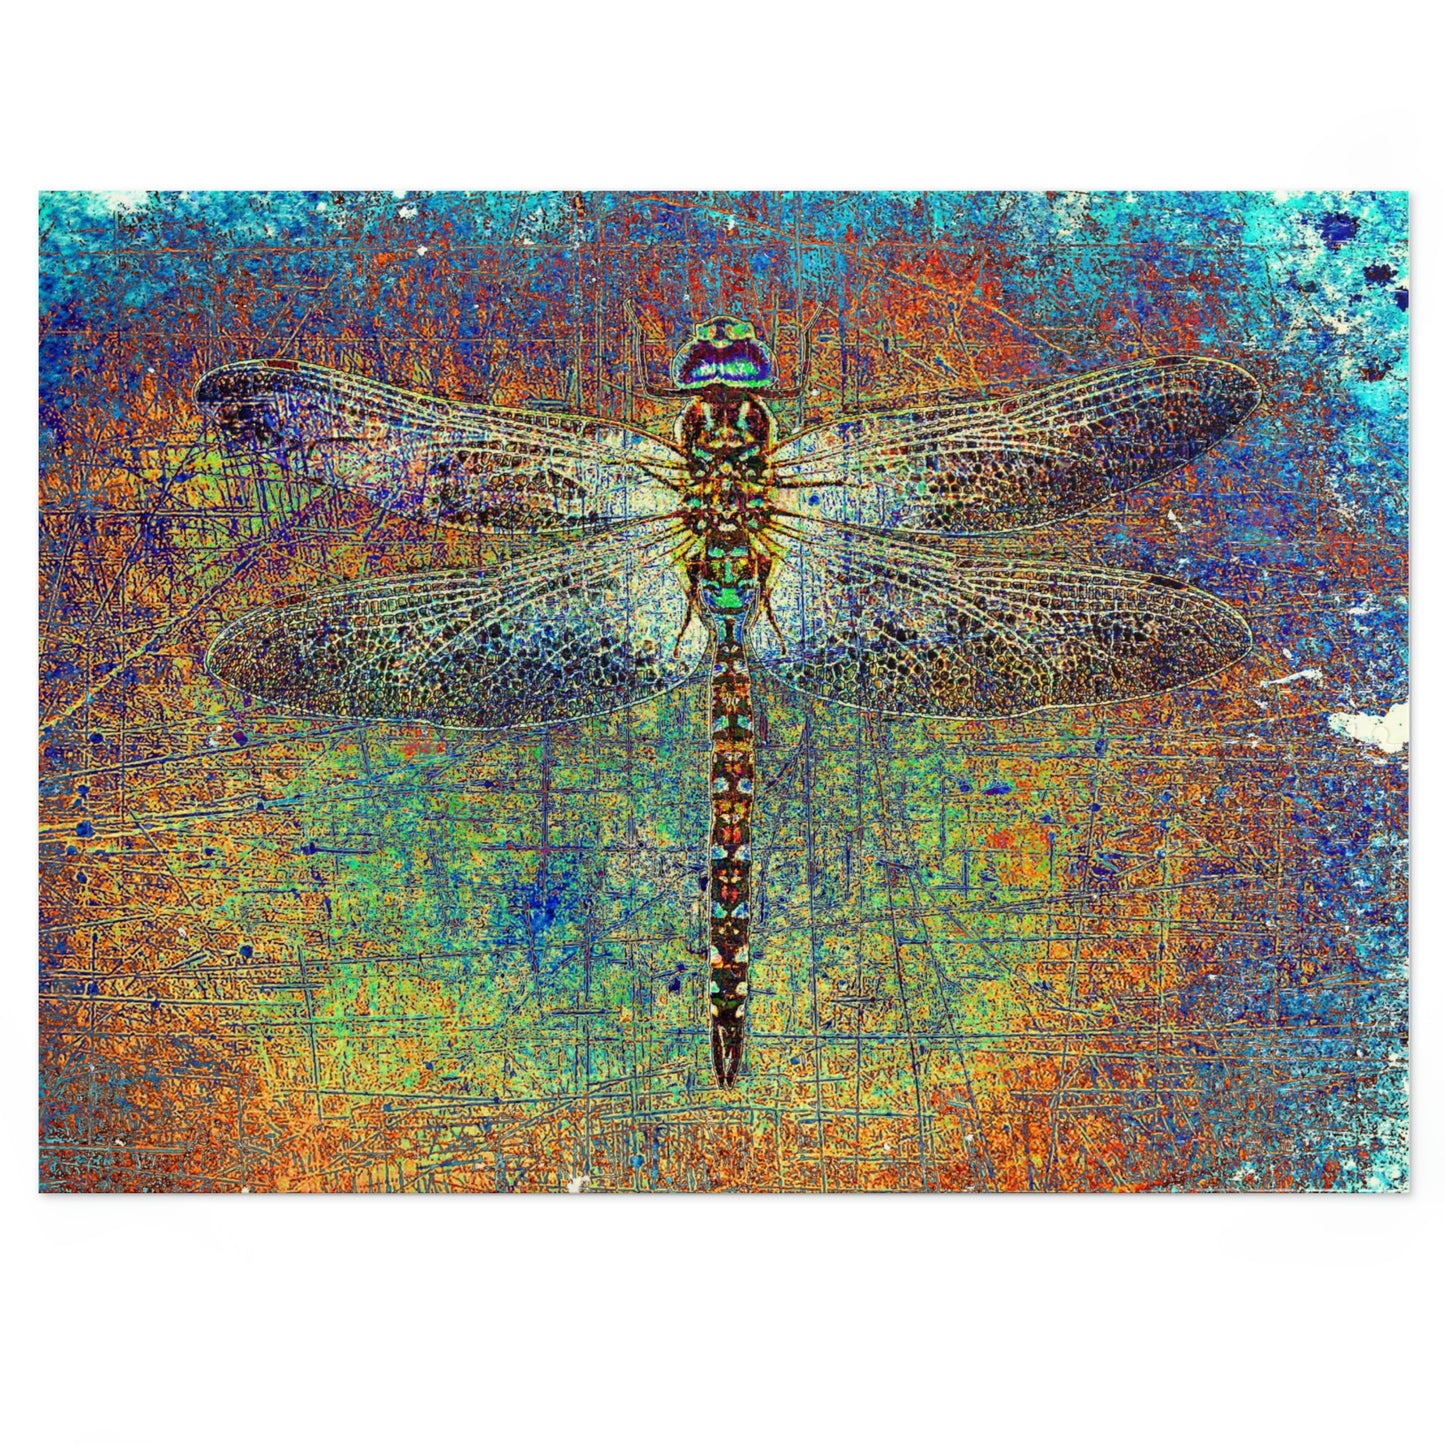 Dragonfly Themed Puzzle and Game - Dragonfly on Multicolor Background 500 Pieces Puzzle